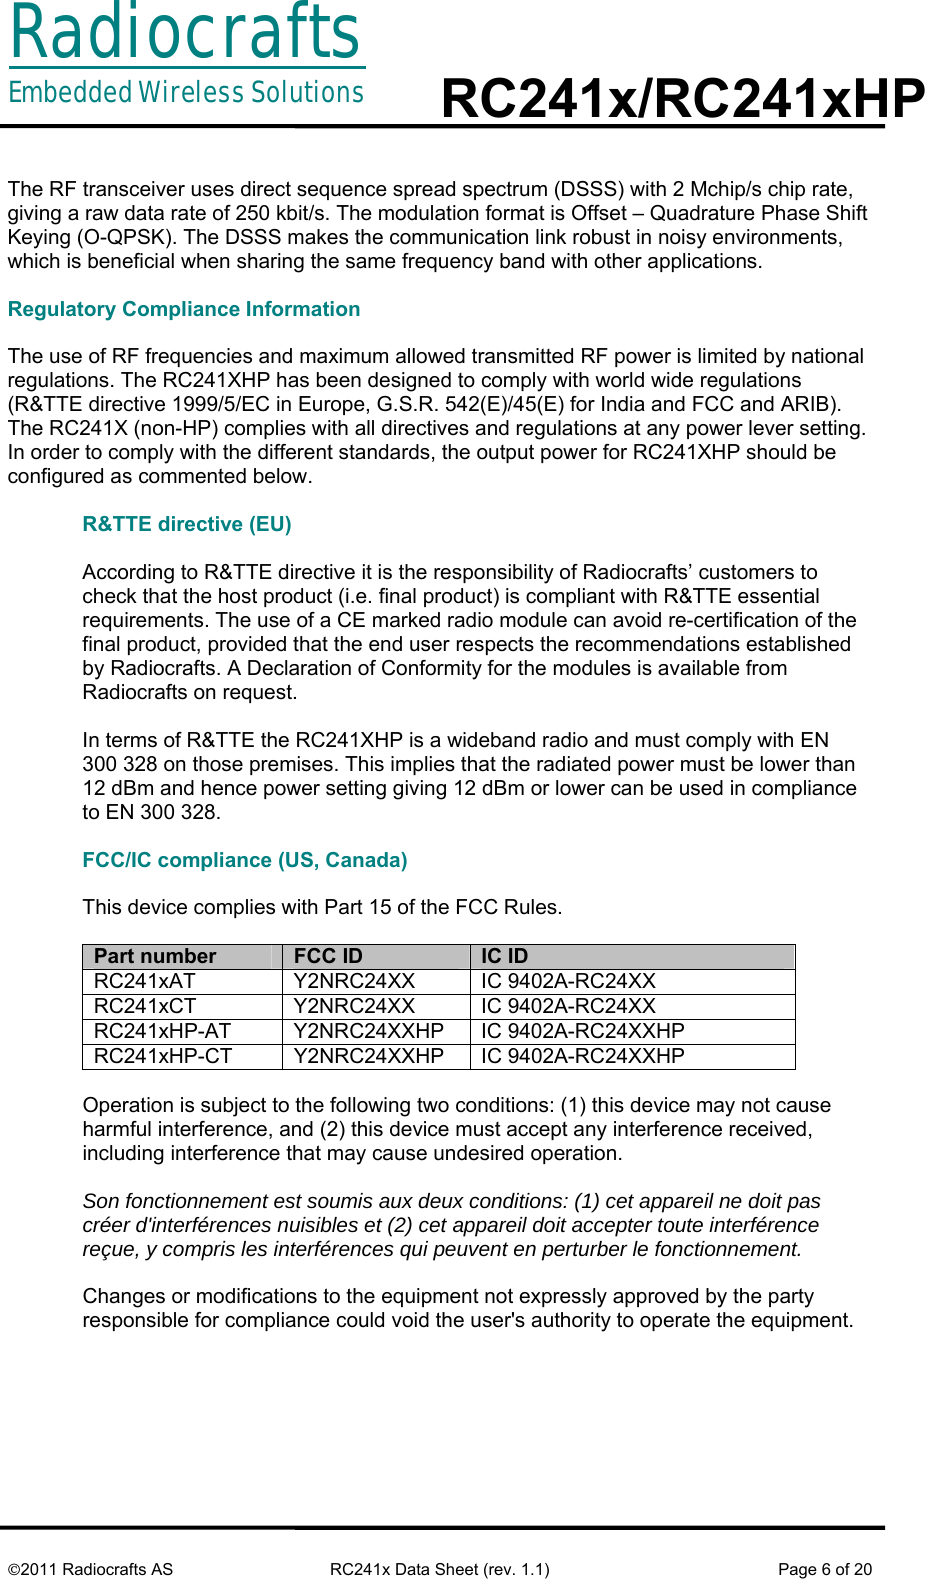 RadiocraftsEmbedded Wireless Solutions  RC241x/RC241xHP     ©2011 Radiocrafts AS  RC241x Data Sheet (rev. 1.1)  Page 6 of 20   The RF transceiver uses direct sequence spread spectrum (DSSS) with 2 Mchip/s chip rate, giving a raw data rate of 250 kbit/s. The modulation format is Offset – Quadrature Phase Shift Keying (O-QPSK). The DSSS makes the communication link robust in noisy environments, which is beneficial when sharing the same frequency band with other applications.  Regulatory Compliance Information  The use of RF frequencies and maximum allowed transmitted RF power is limited by national regulations. The RC241XHP has been designed to comply with world wide regulations (R&amp;TTE directive 1999/5/EC in Europe, G.S.R. 542(E)/45(E) for India and FCC and ARIB). The RC241X (non-HP) complies with all directives and regulations at any power lever setting. In order to comply with the different standards, the output power for RC241XHP should be configured as commented below.   R&amp;TTE directive (EU)  According to R&amp;TTE directive it is the responsibility of Radiocrafts’ customers to check that the host product (i.e. final product) is compliant with R&amp;TTE essential requirements. The use of a CE marked radio module can avoid re-certification of the final product, provided that the end user respects the recommendations established by Radiocrafts. A Declaration of Conformity for the modules is available from Radiocrafts on request.  In terms of R&amp;TTE the RC241XHP is a wideband radio and must comply with EN 300 328 on those premises. This implies that the radiated power must be lower than 12 dBm and hence power setting giving 12 dBm or lower can be used in compliance to EN 300 328.  FCC/IC compliance (US, Canada)   This device complies with Part 15 of the FCC Rules.  Part number  FCC ID  IC ID RC241xAT Y2NRC24XX IC 9402A-RC24XX RC241xCT Y2NRC24XX IC 9402A-RC24XX RC241xHP-AT Y2NRC24XXHP IC 9402A-RC24XXHP RC241xHP-CT Y2NRC24XXHP IC 9402A-RC24XXHP  Operation is subject to the following two conditions: (1) this device may not cause harmful interference, and (2) this device must accept any interference received, including interference that may cause undesired operation.  Son fonctionnement est soumis aux deux conditions: (1) cet appareil ne doit pas  créer d&apos;interférences nuisibles et (2) cet appareil doit accepter toute interférence reçue, y compris les interférences qui peuvent en perturber le fonctionnement.  Changes or modifications to the equipment not expressly approved by the party responsible for compliance could void the user&apos;s authority to operate the equipment.  